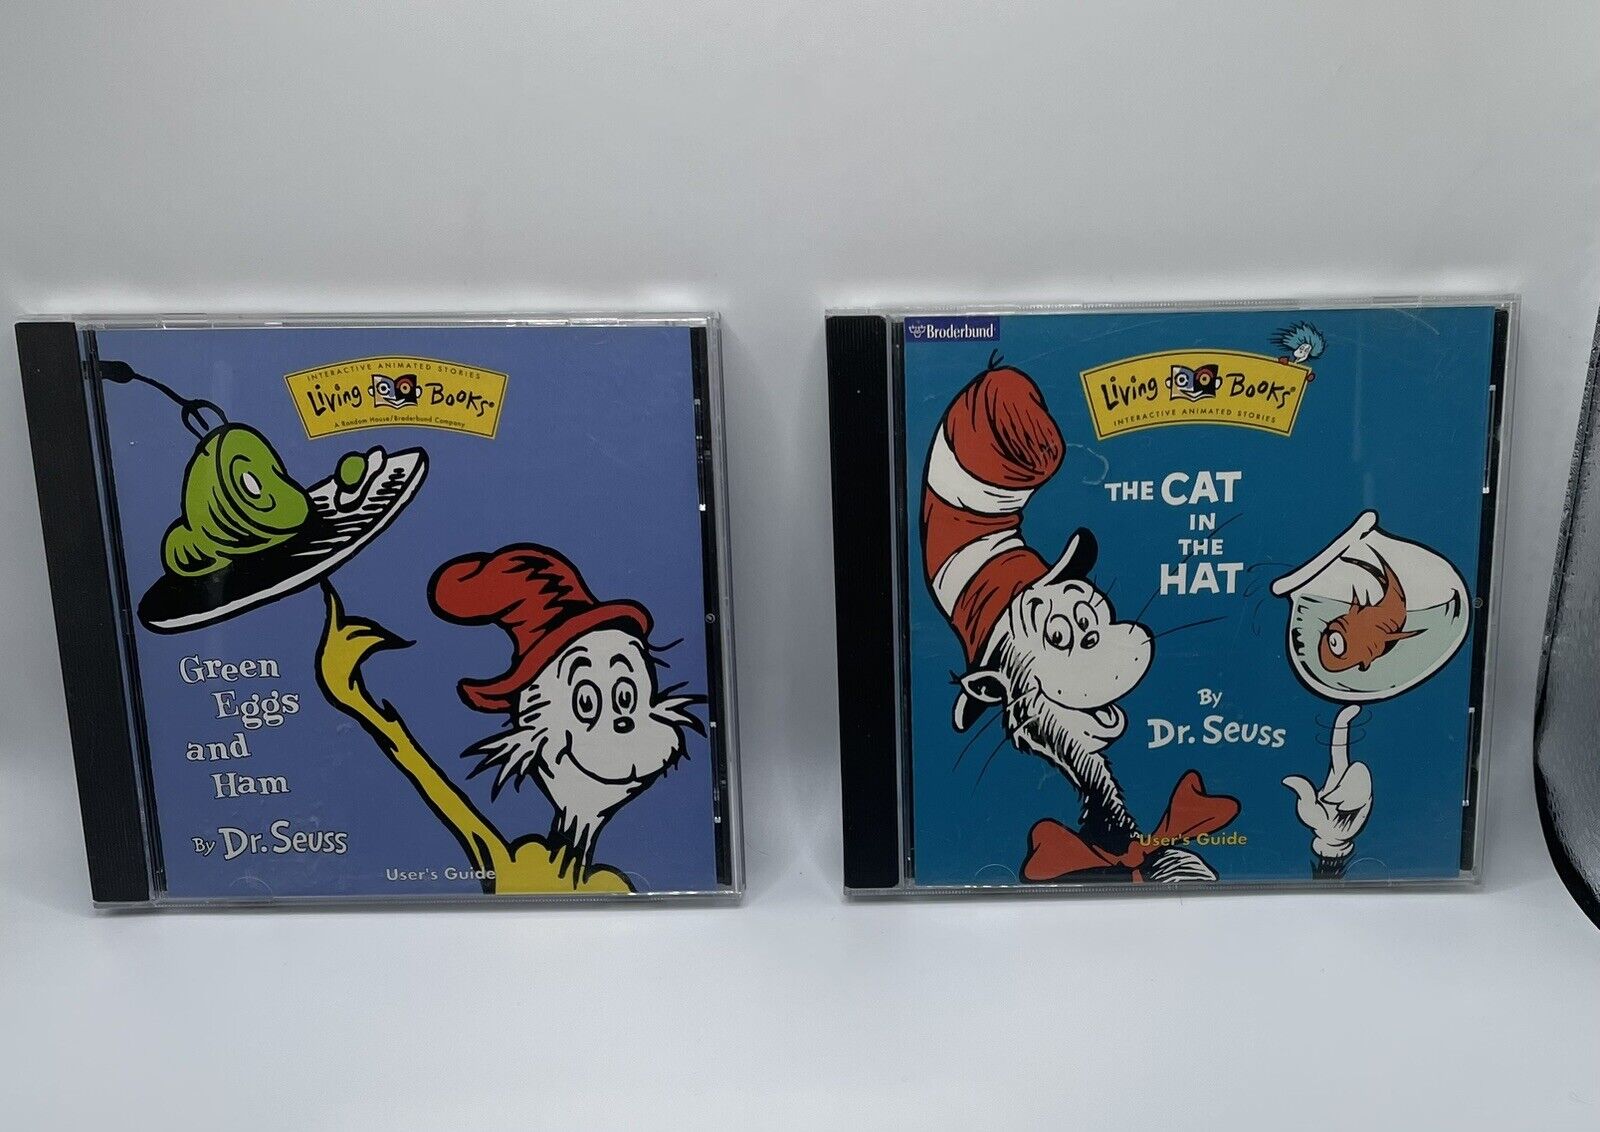 Dr Seuss Living Books Green Eggs and Ham & Cat in the Hat CDRom Interactive Book